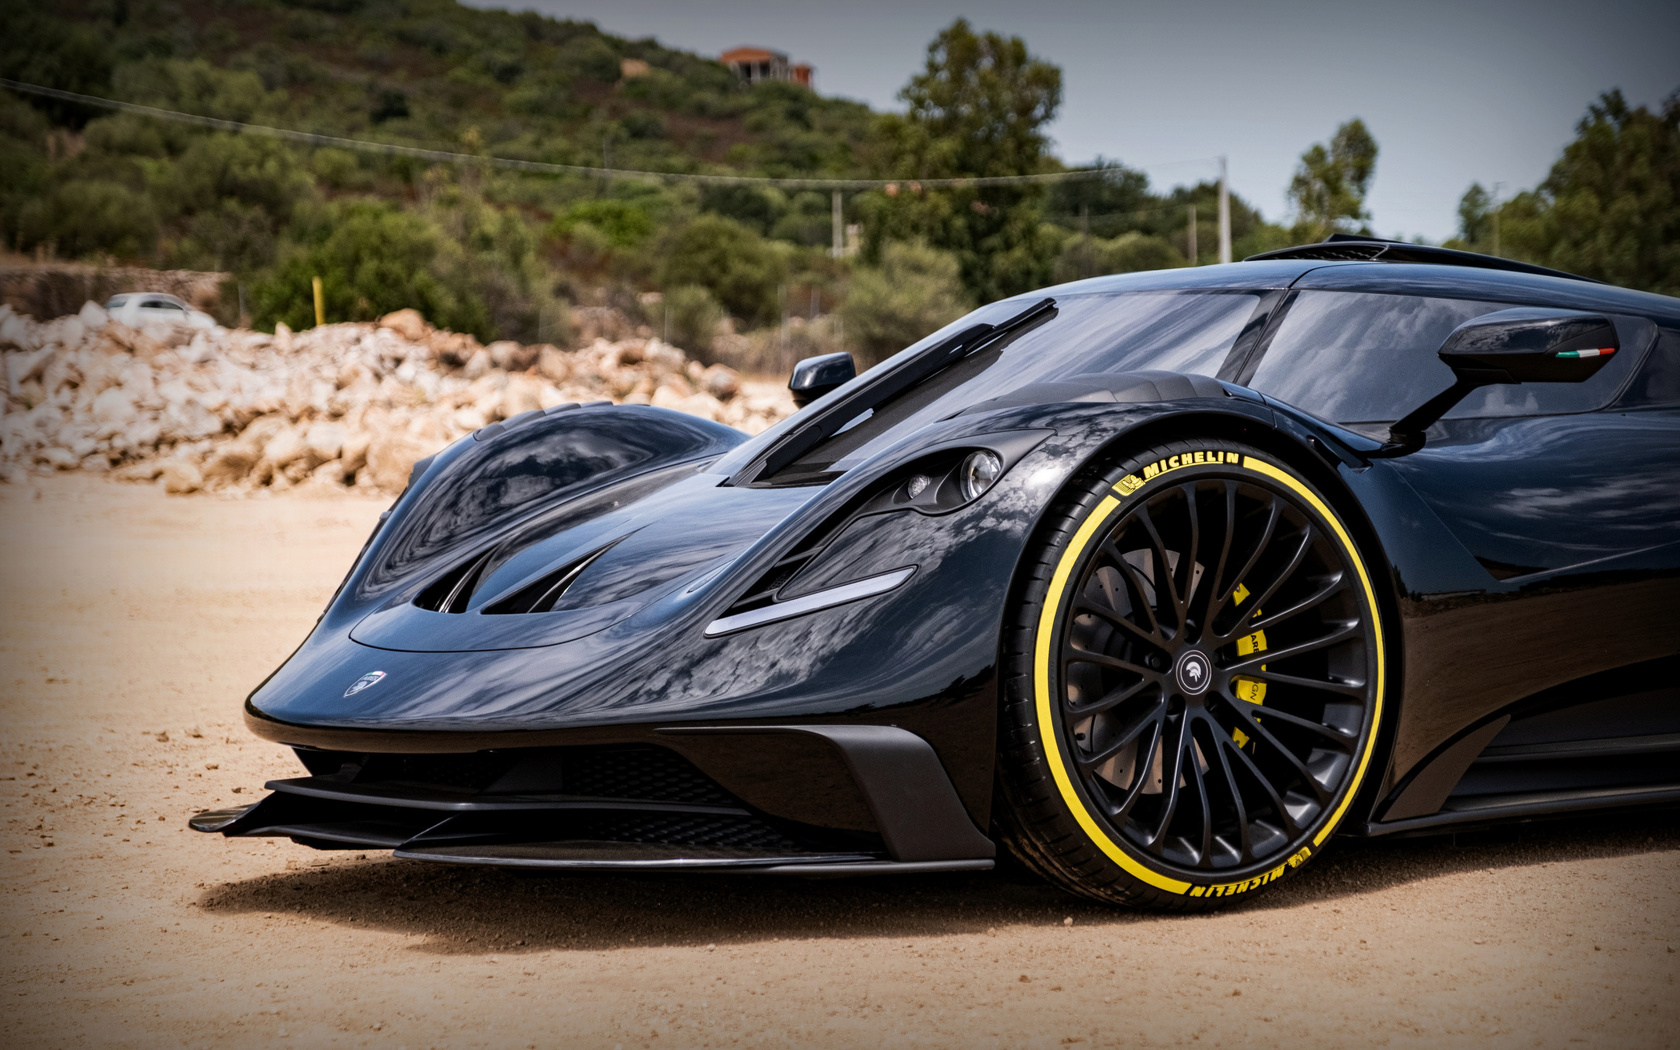 2021, ares, design, s1, project, front view, exterior, black, supercar